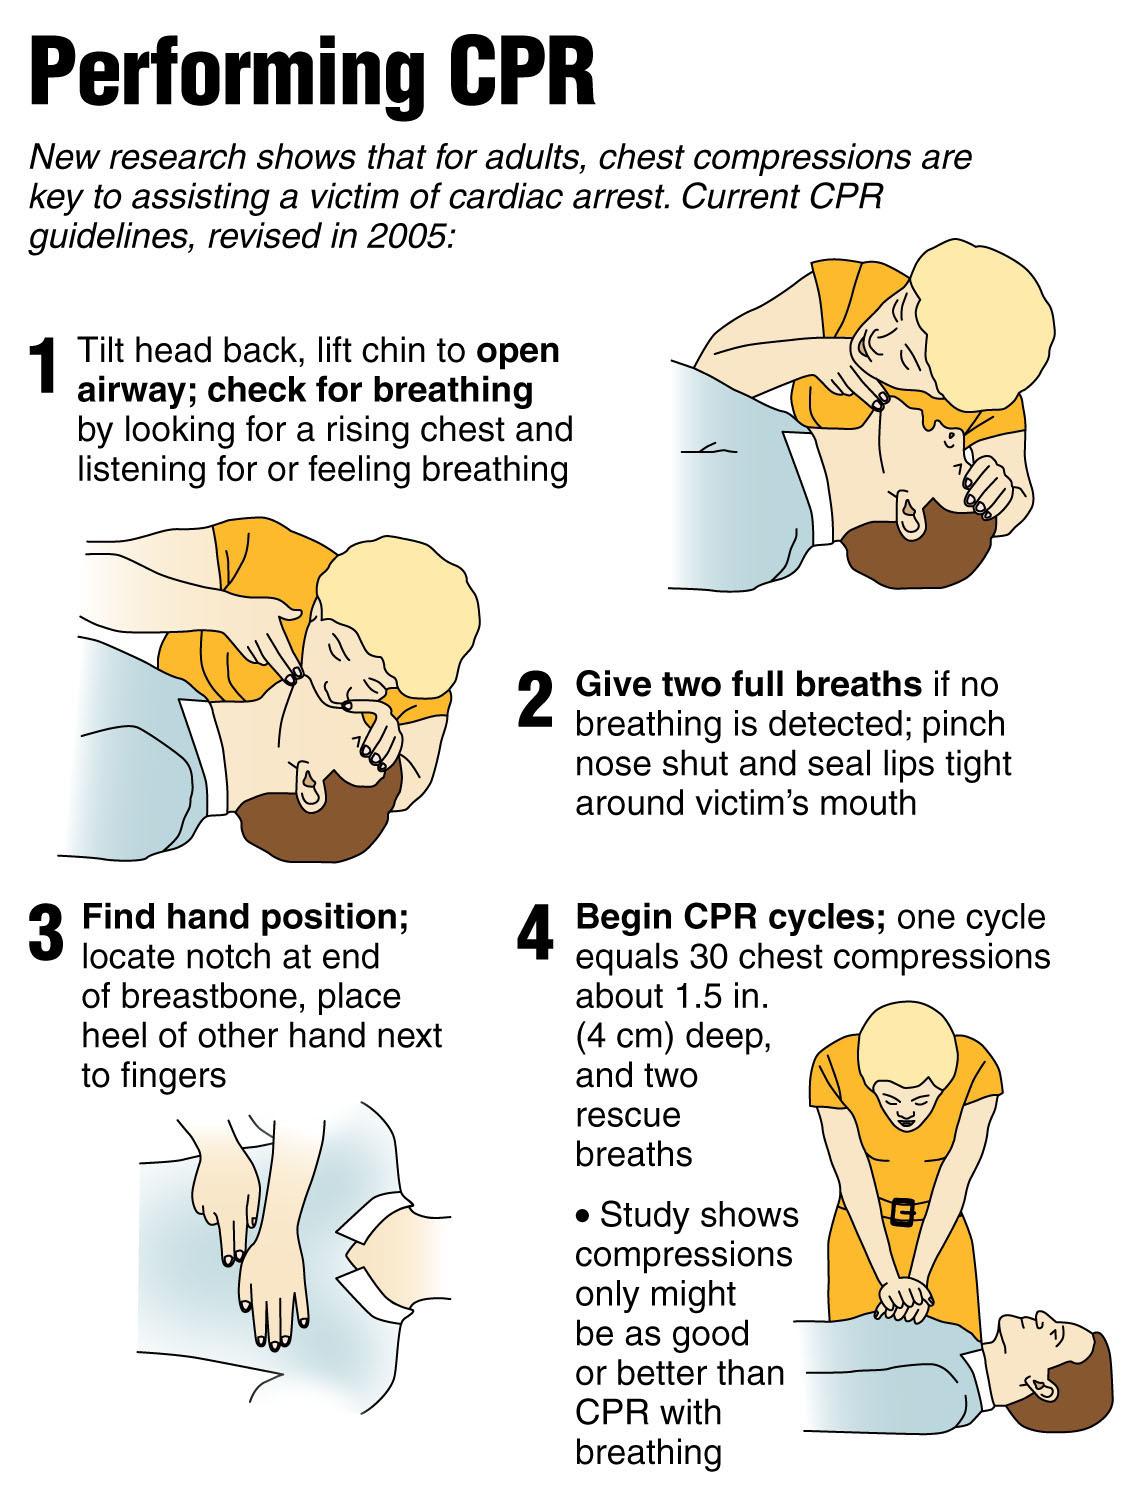 shock first aid